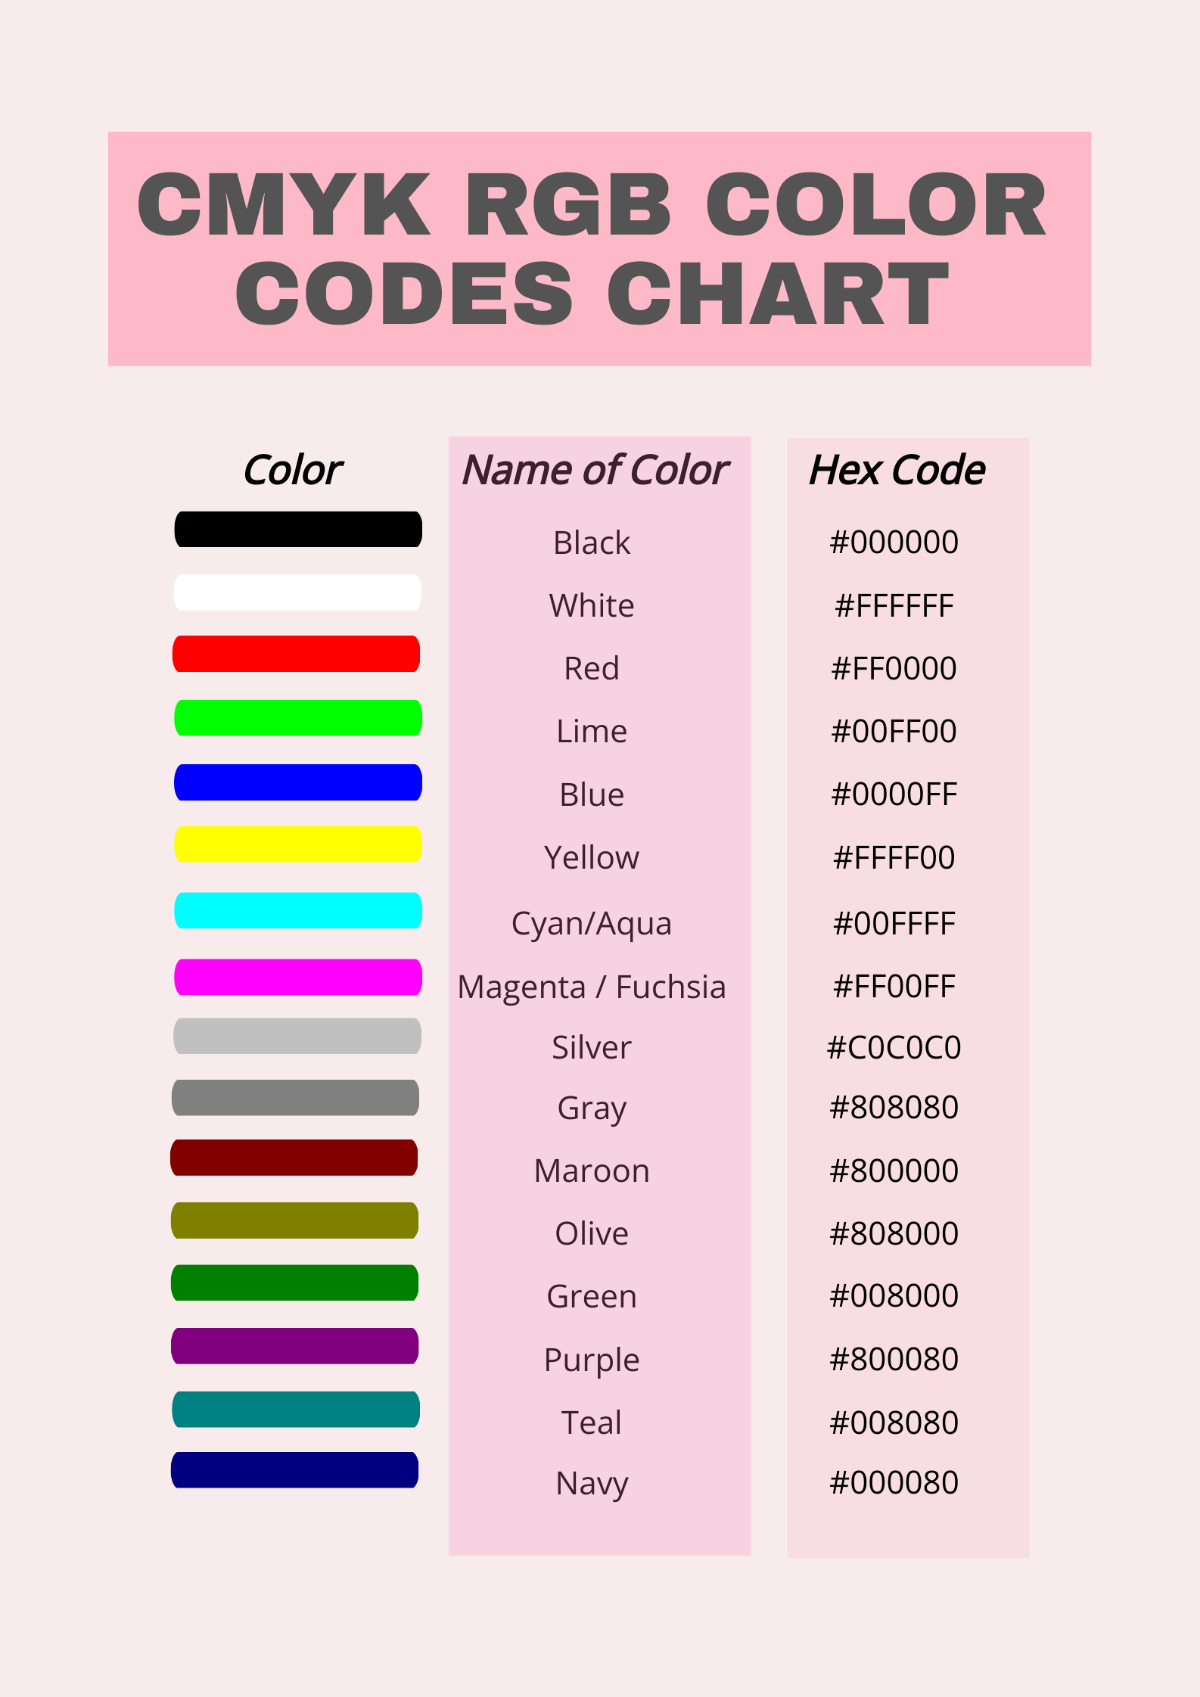 CMYK RGB Color Codes Chart Template